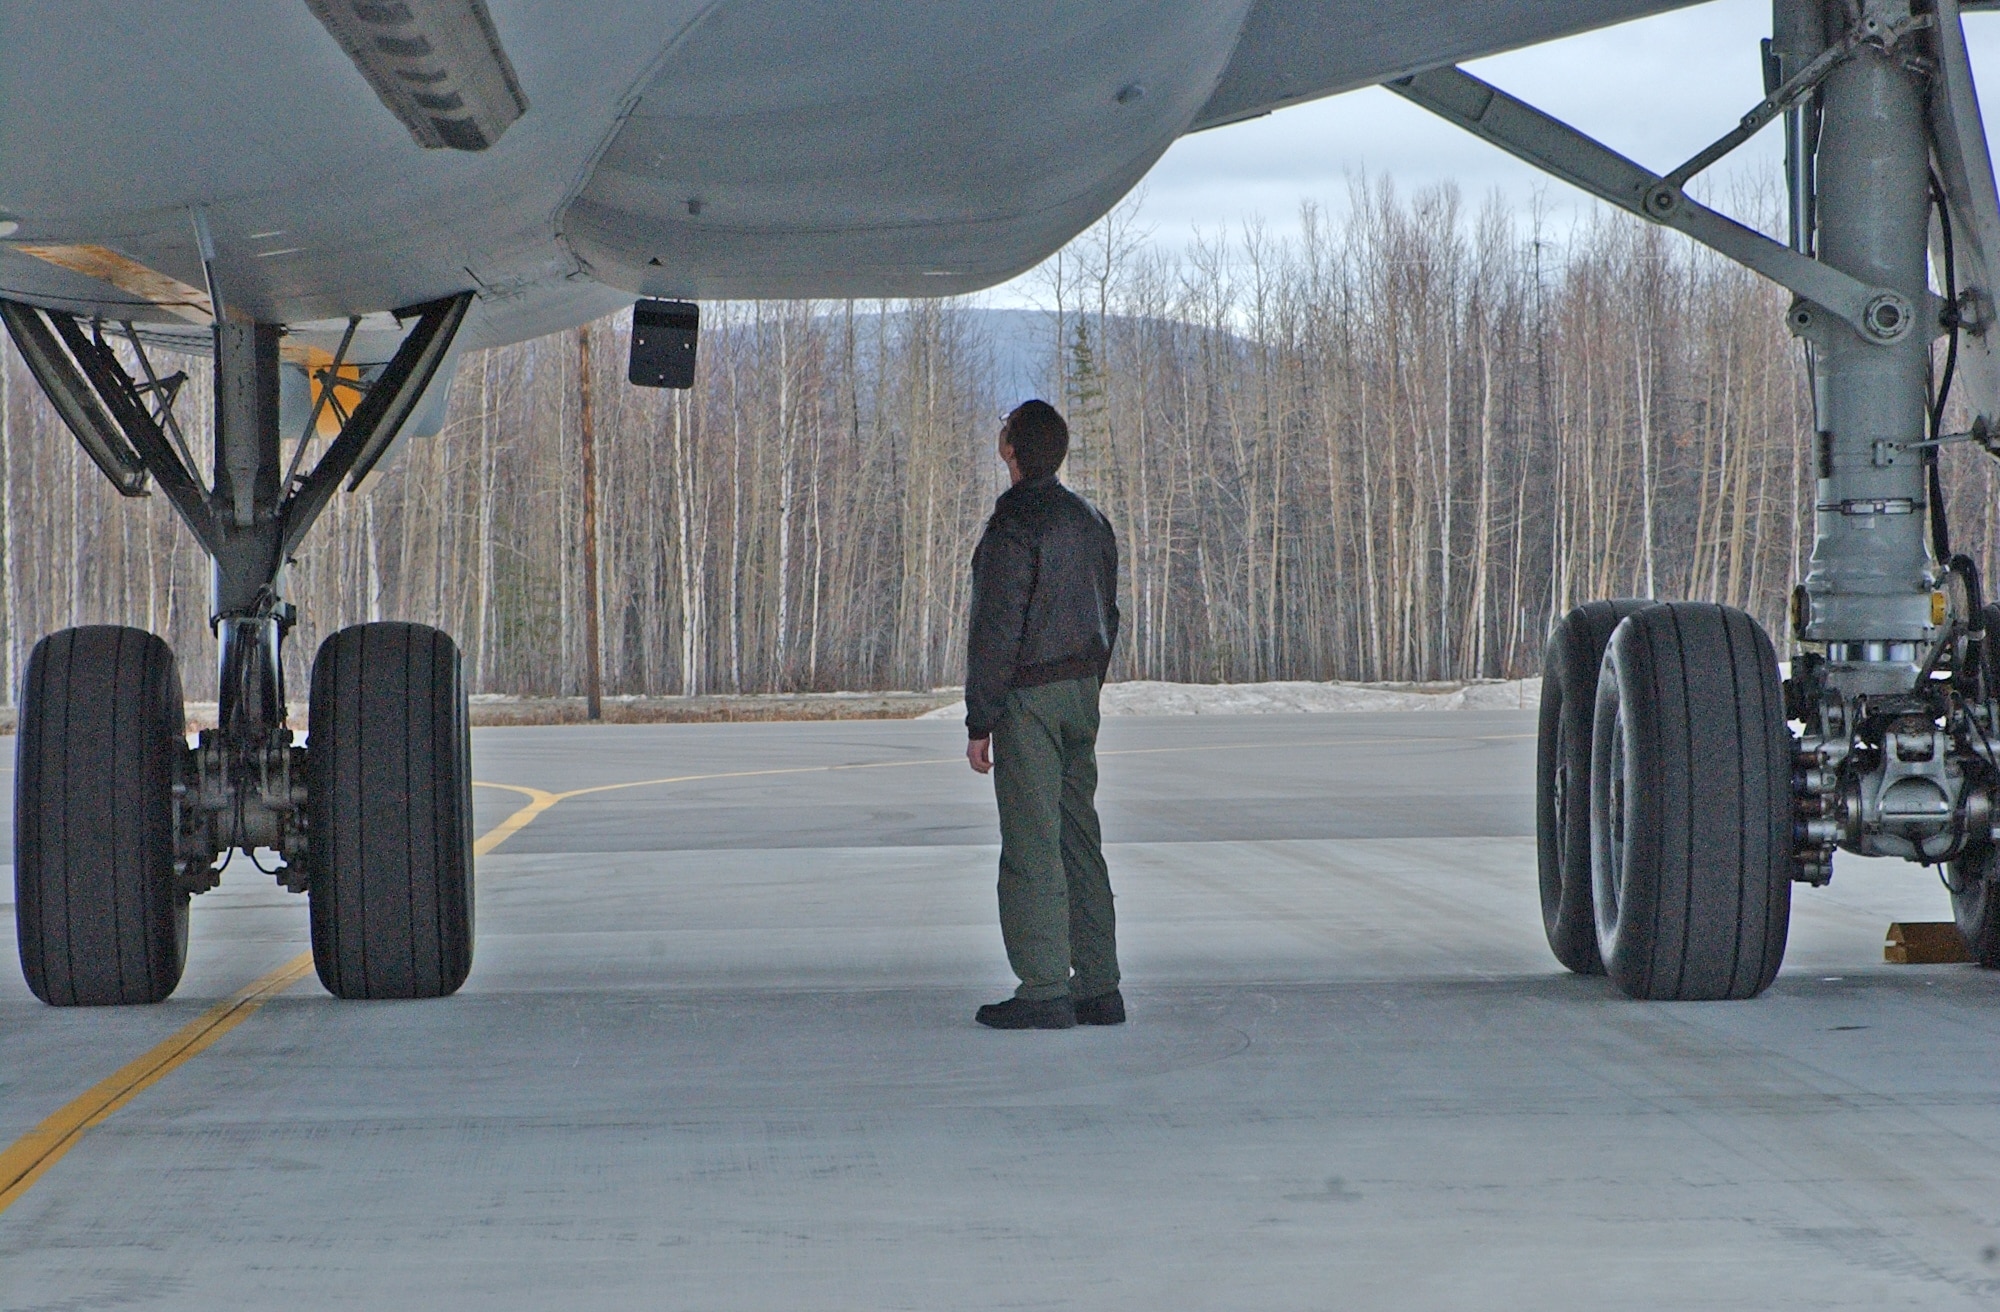 EIELSON AIR FORCE BASE, Alaska--Tech. Sgt. David Seyl, 9th Air Refueling Squadron flight engineer, performs post-flight safety checks on a KC-10 Extender after a Red Flag-Alaska 07-1 refueling flight April 11. The KC-10 can transport up to 75 people and nearly 170,000 pounds of cargo a distance of about 4,400 miles unrefueled.(U.S. Air Force photo by Senior Airman Justin Weaver).